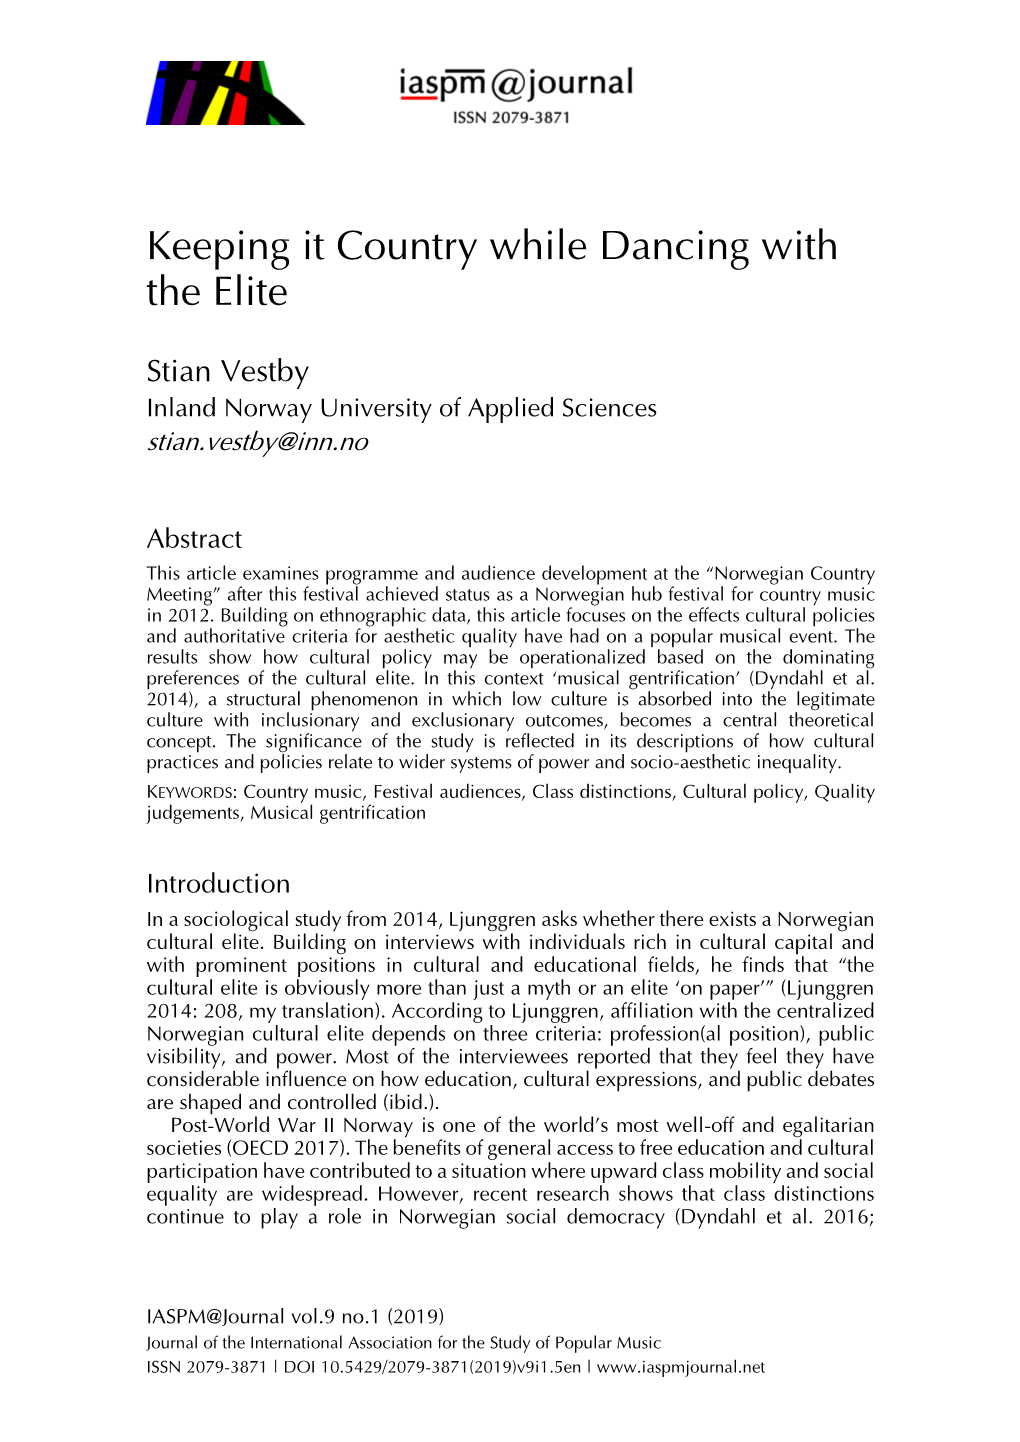 Keeping It Country While Dancing with the Elite